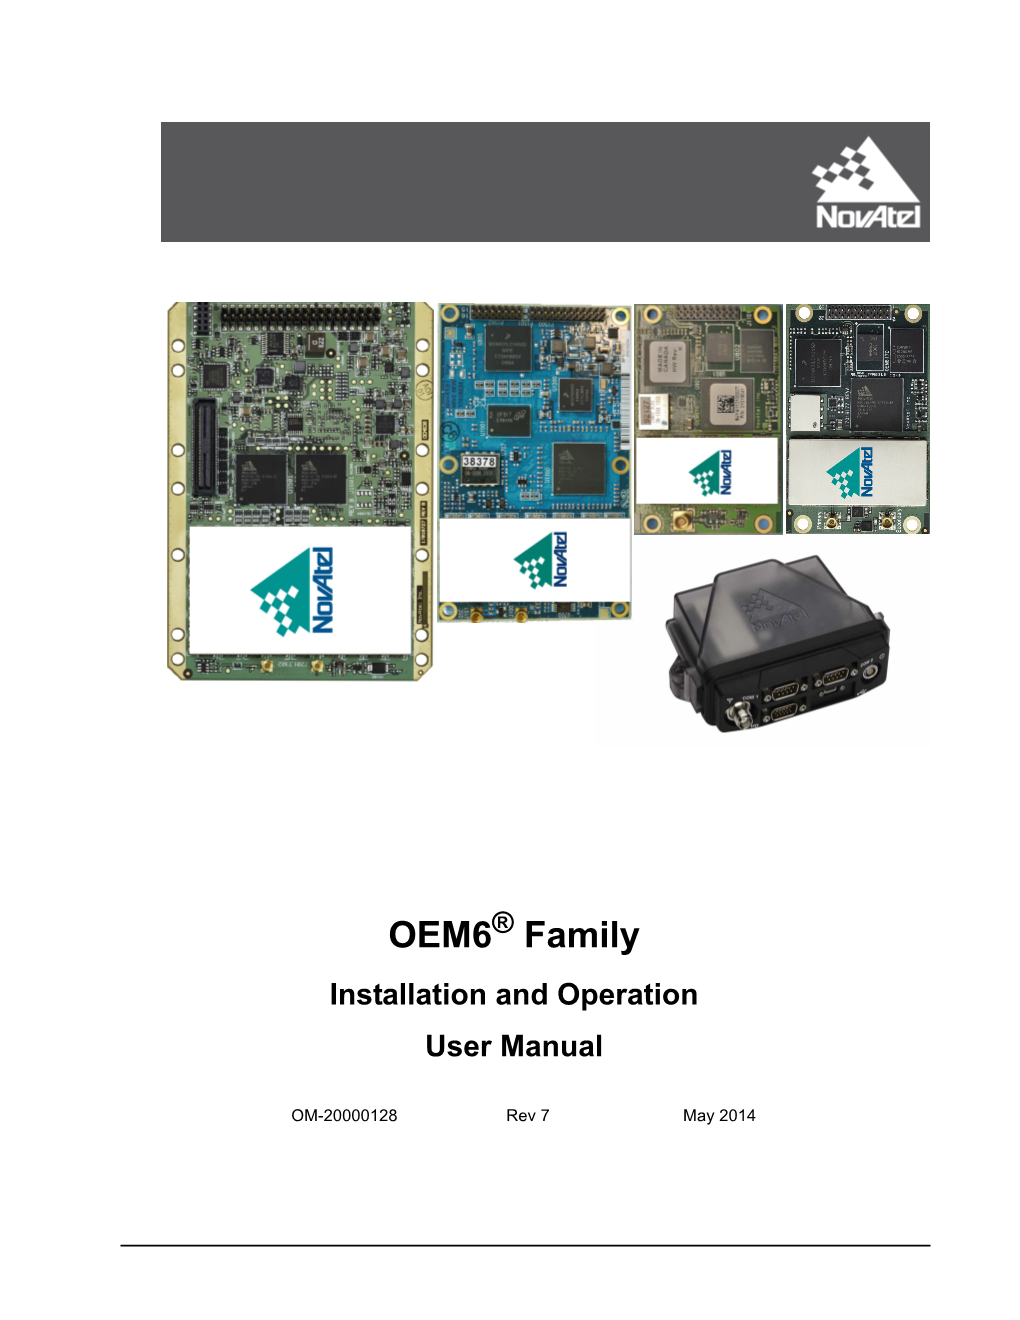 OEM6 Family Installation and Operation User Manual Rev 7 Table of Contents